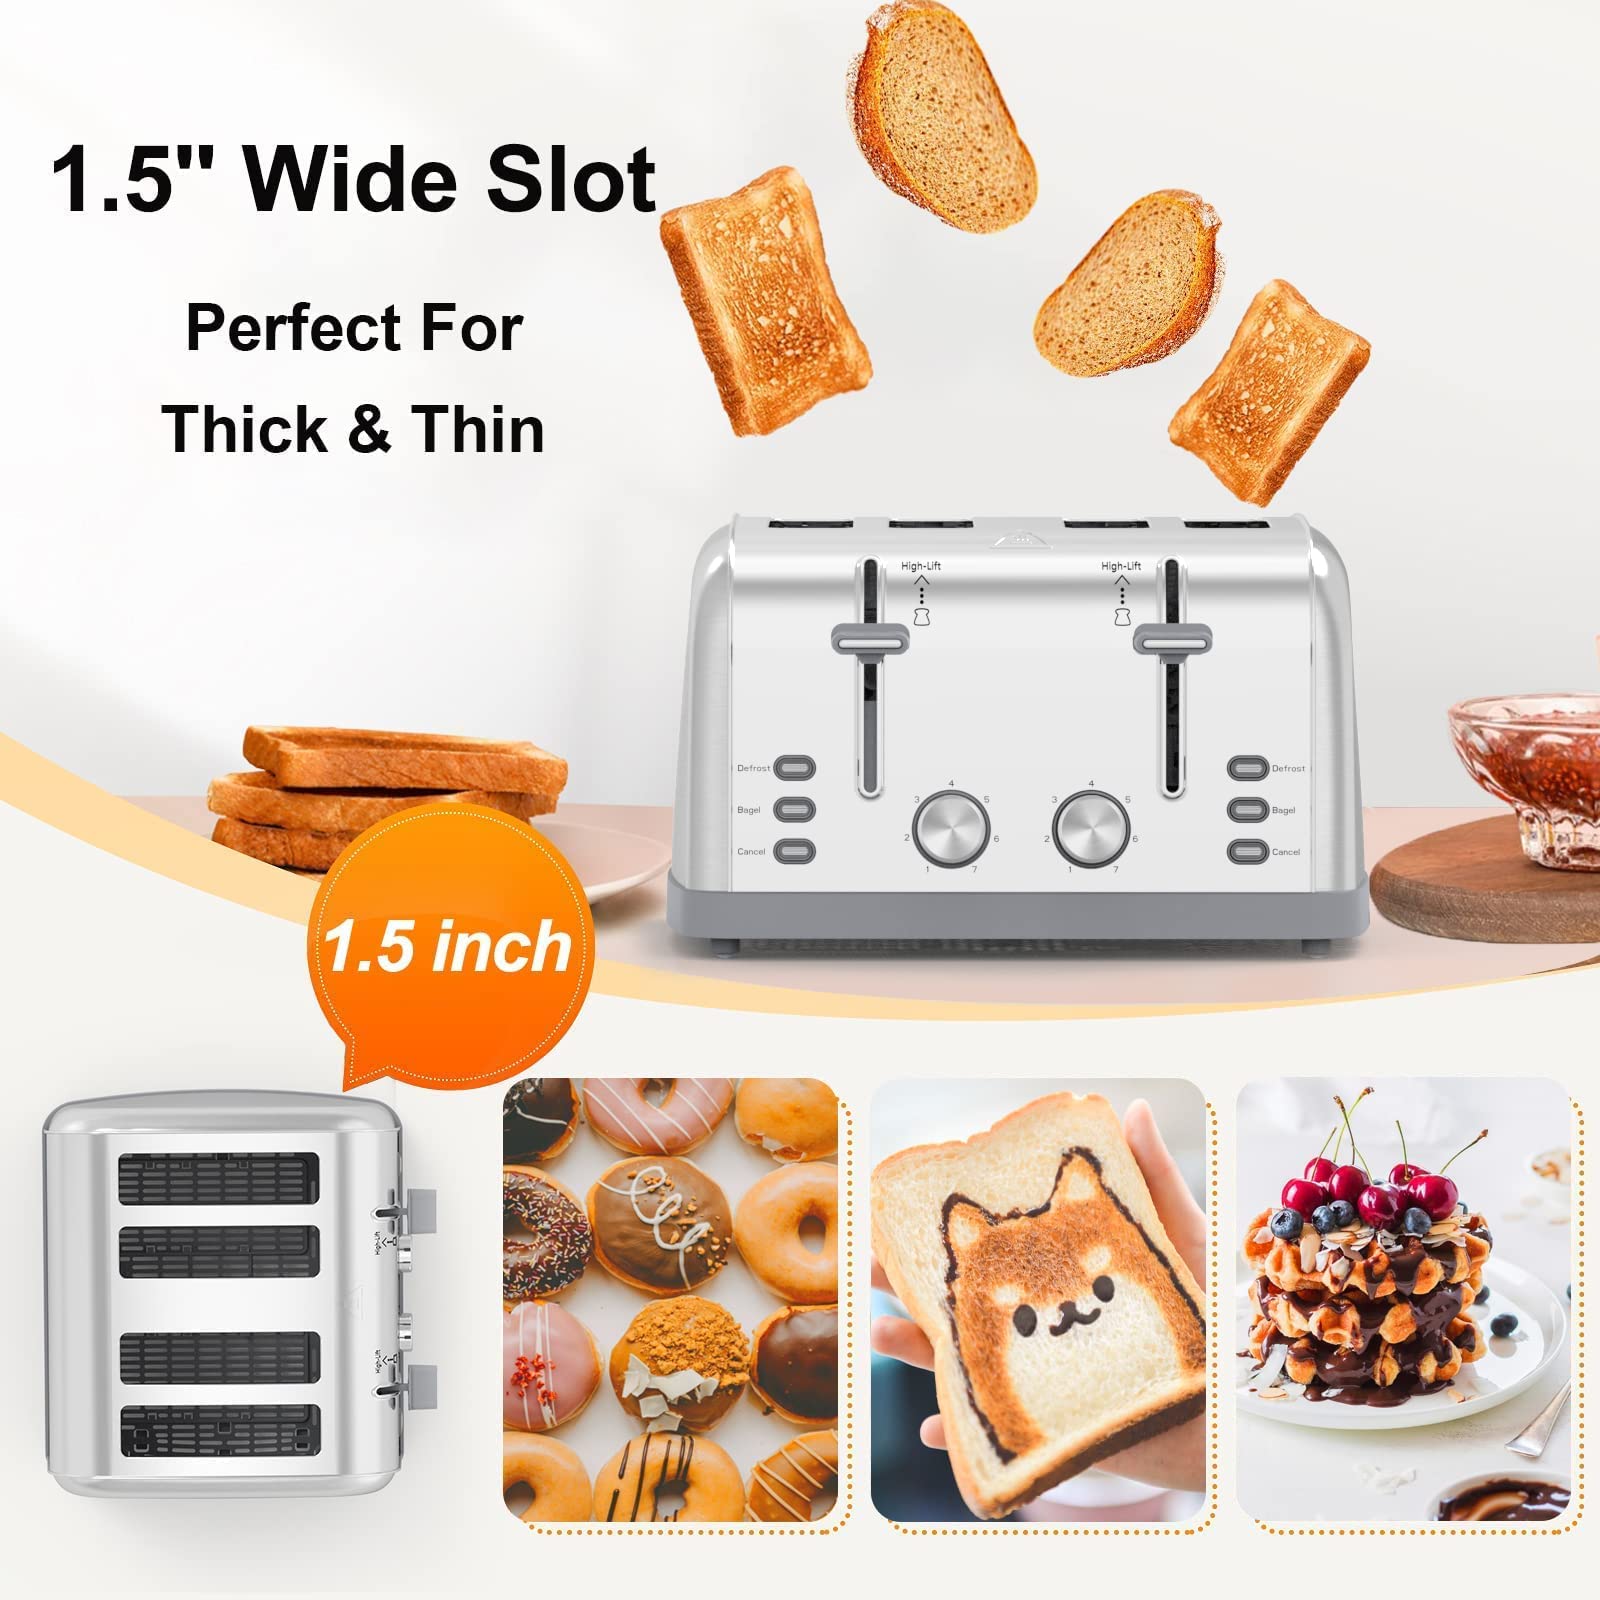 LAINSTEN Toaster 4 Slice,Retro Stainless Steel Toater with 7 Shade Settings,Best Prime Toaster for Waffles, 4 Slice Toaster with 3 Mode,B